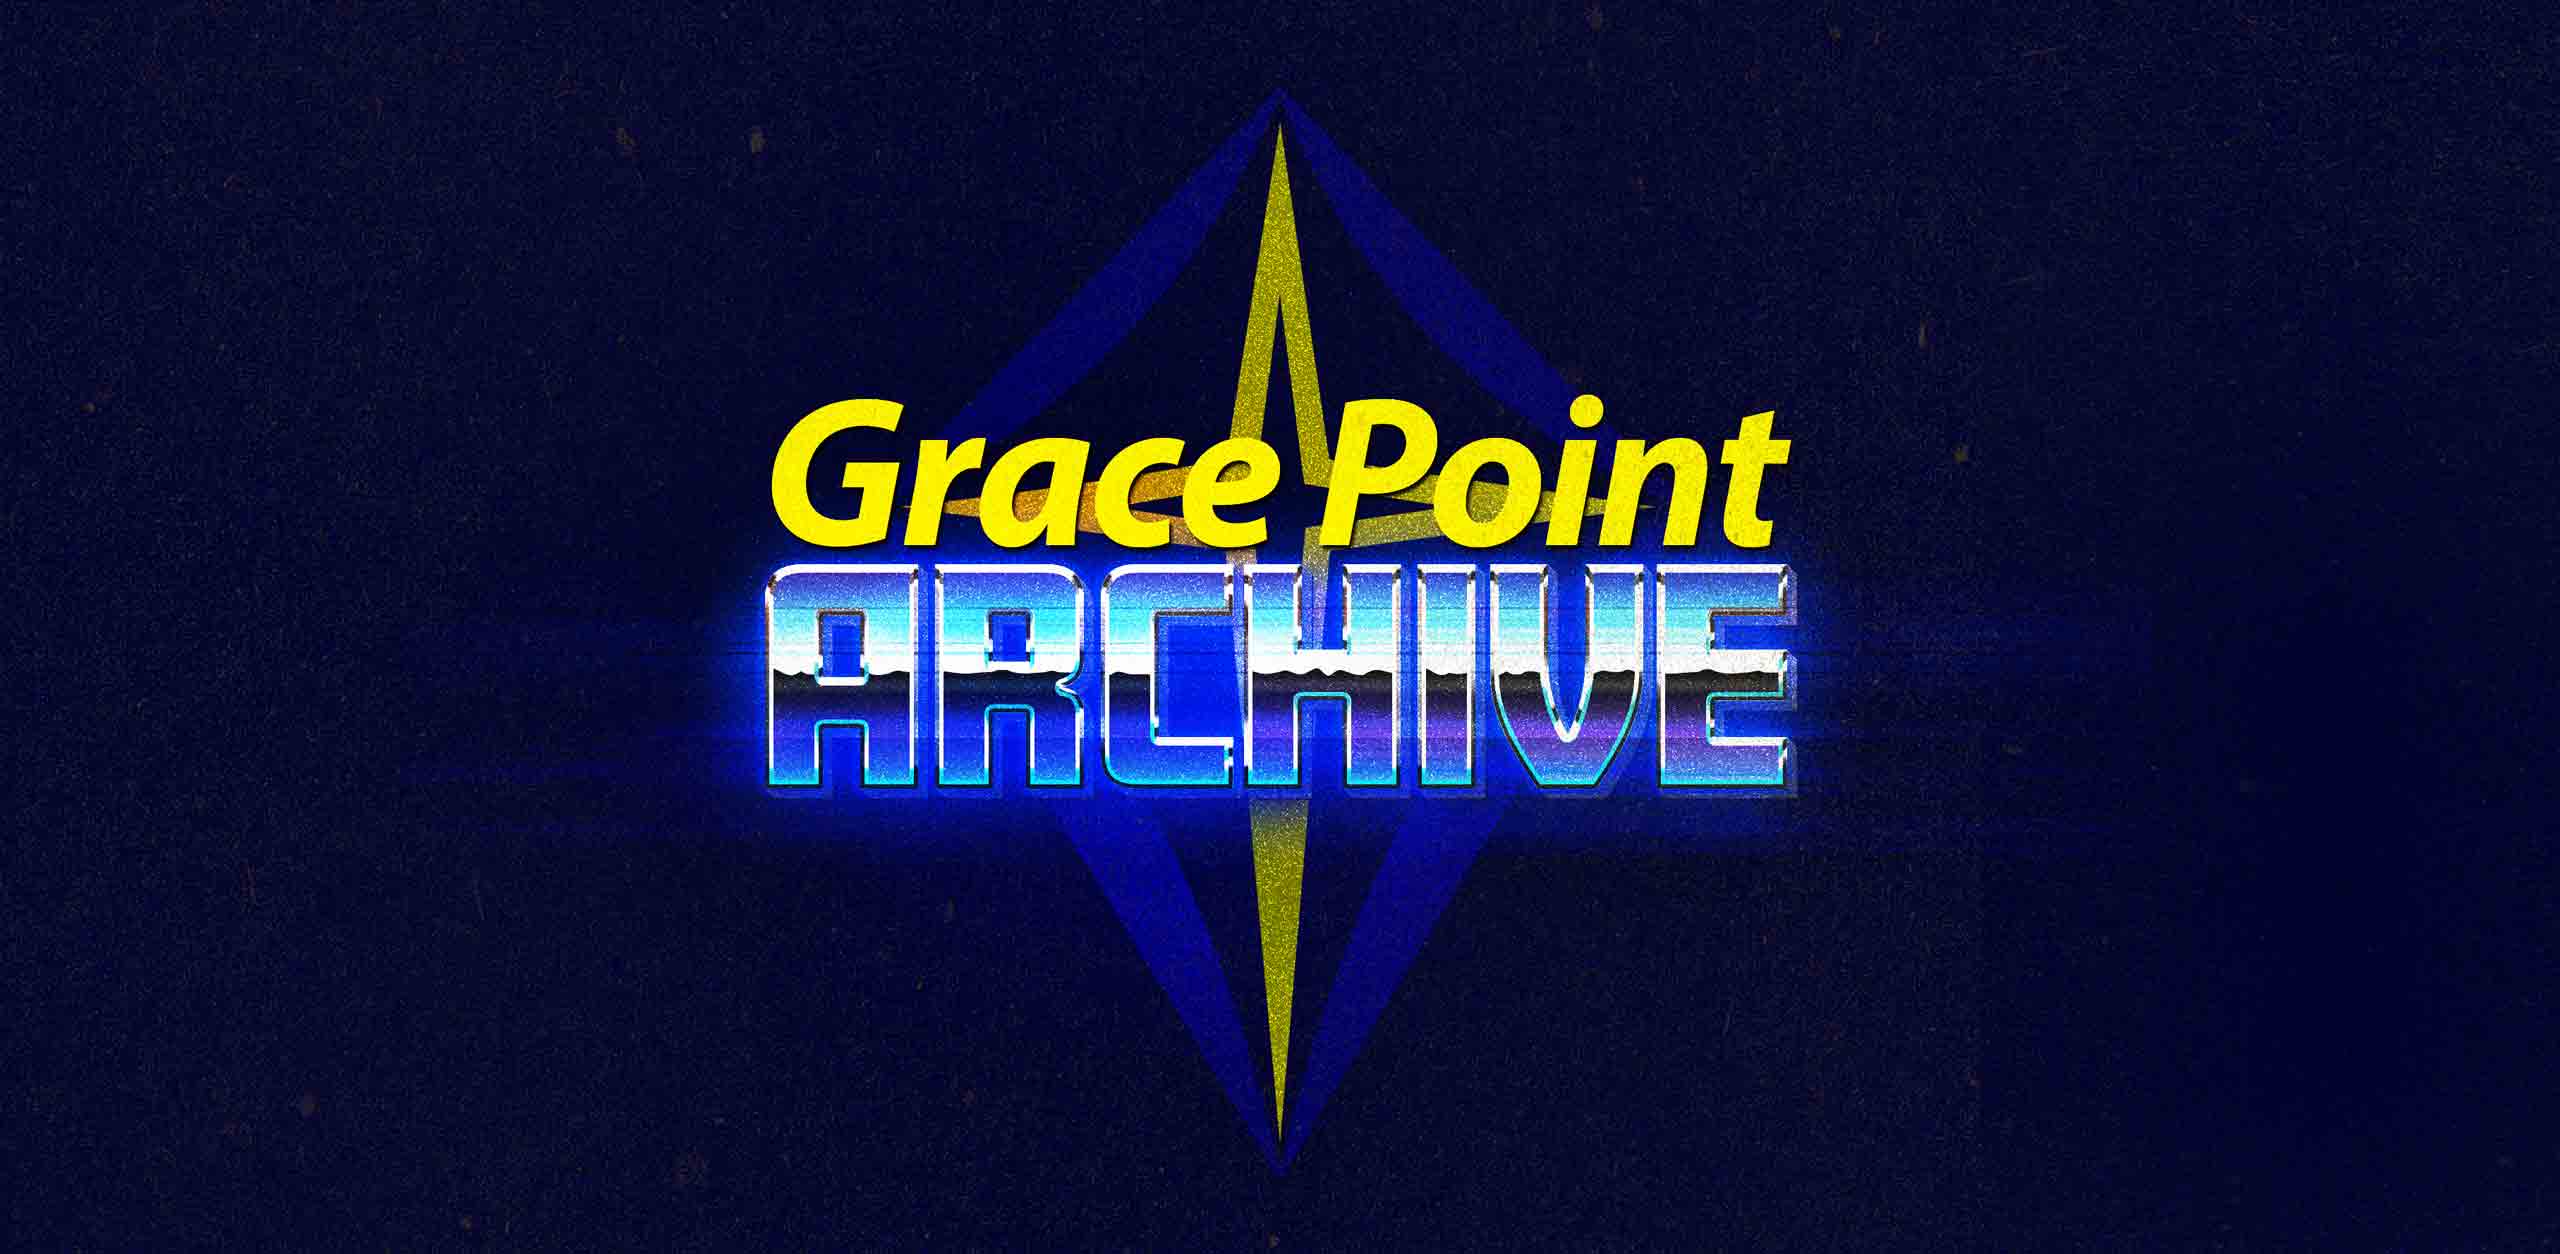 Featured image for “Grace Point Archives”